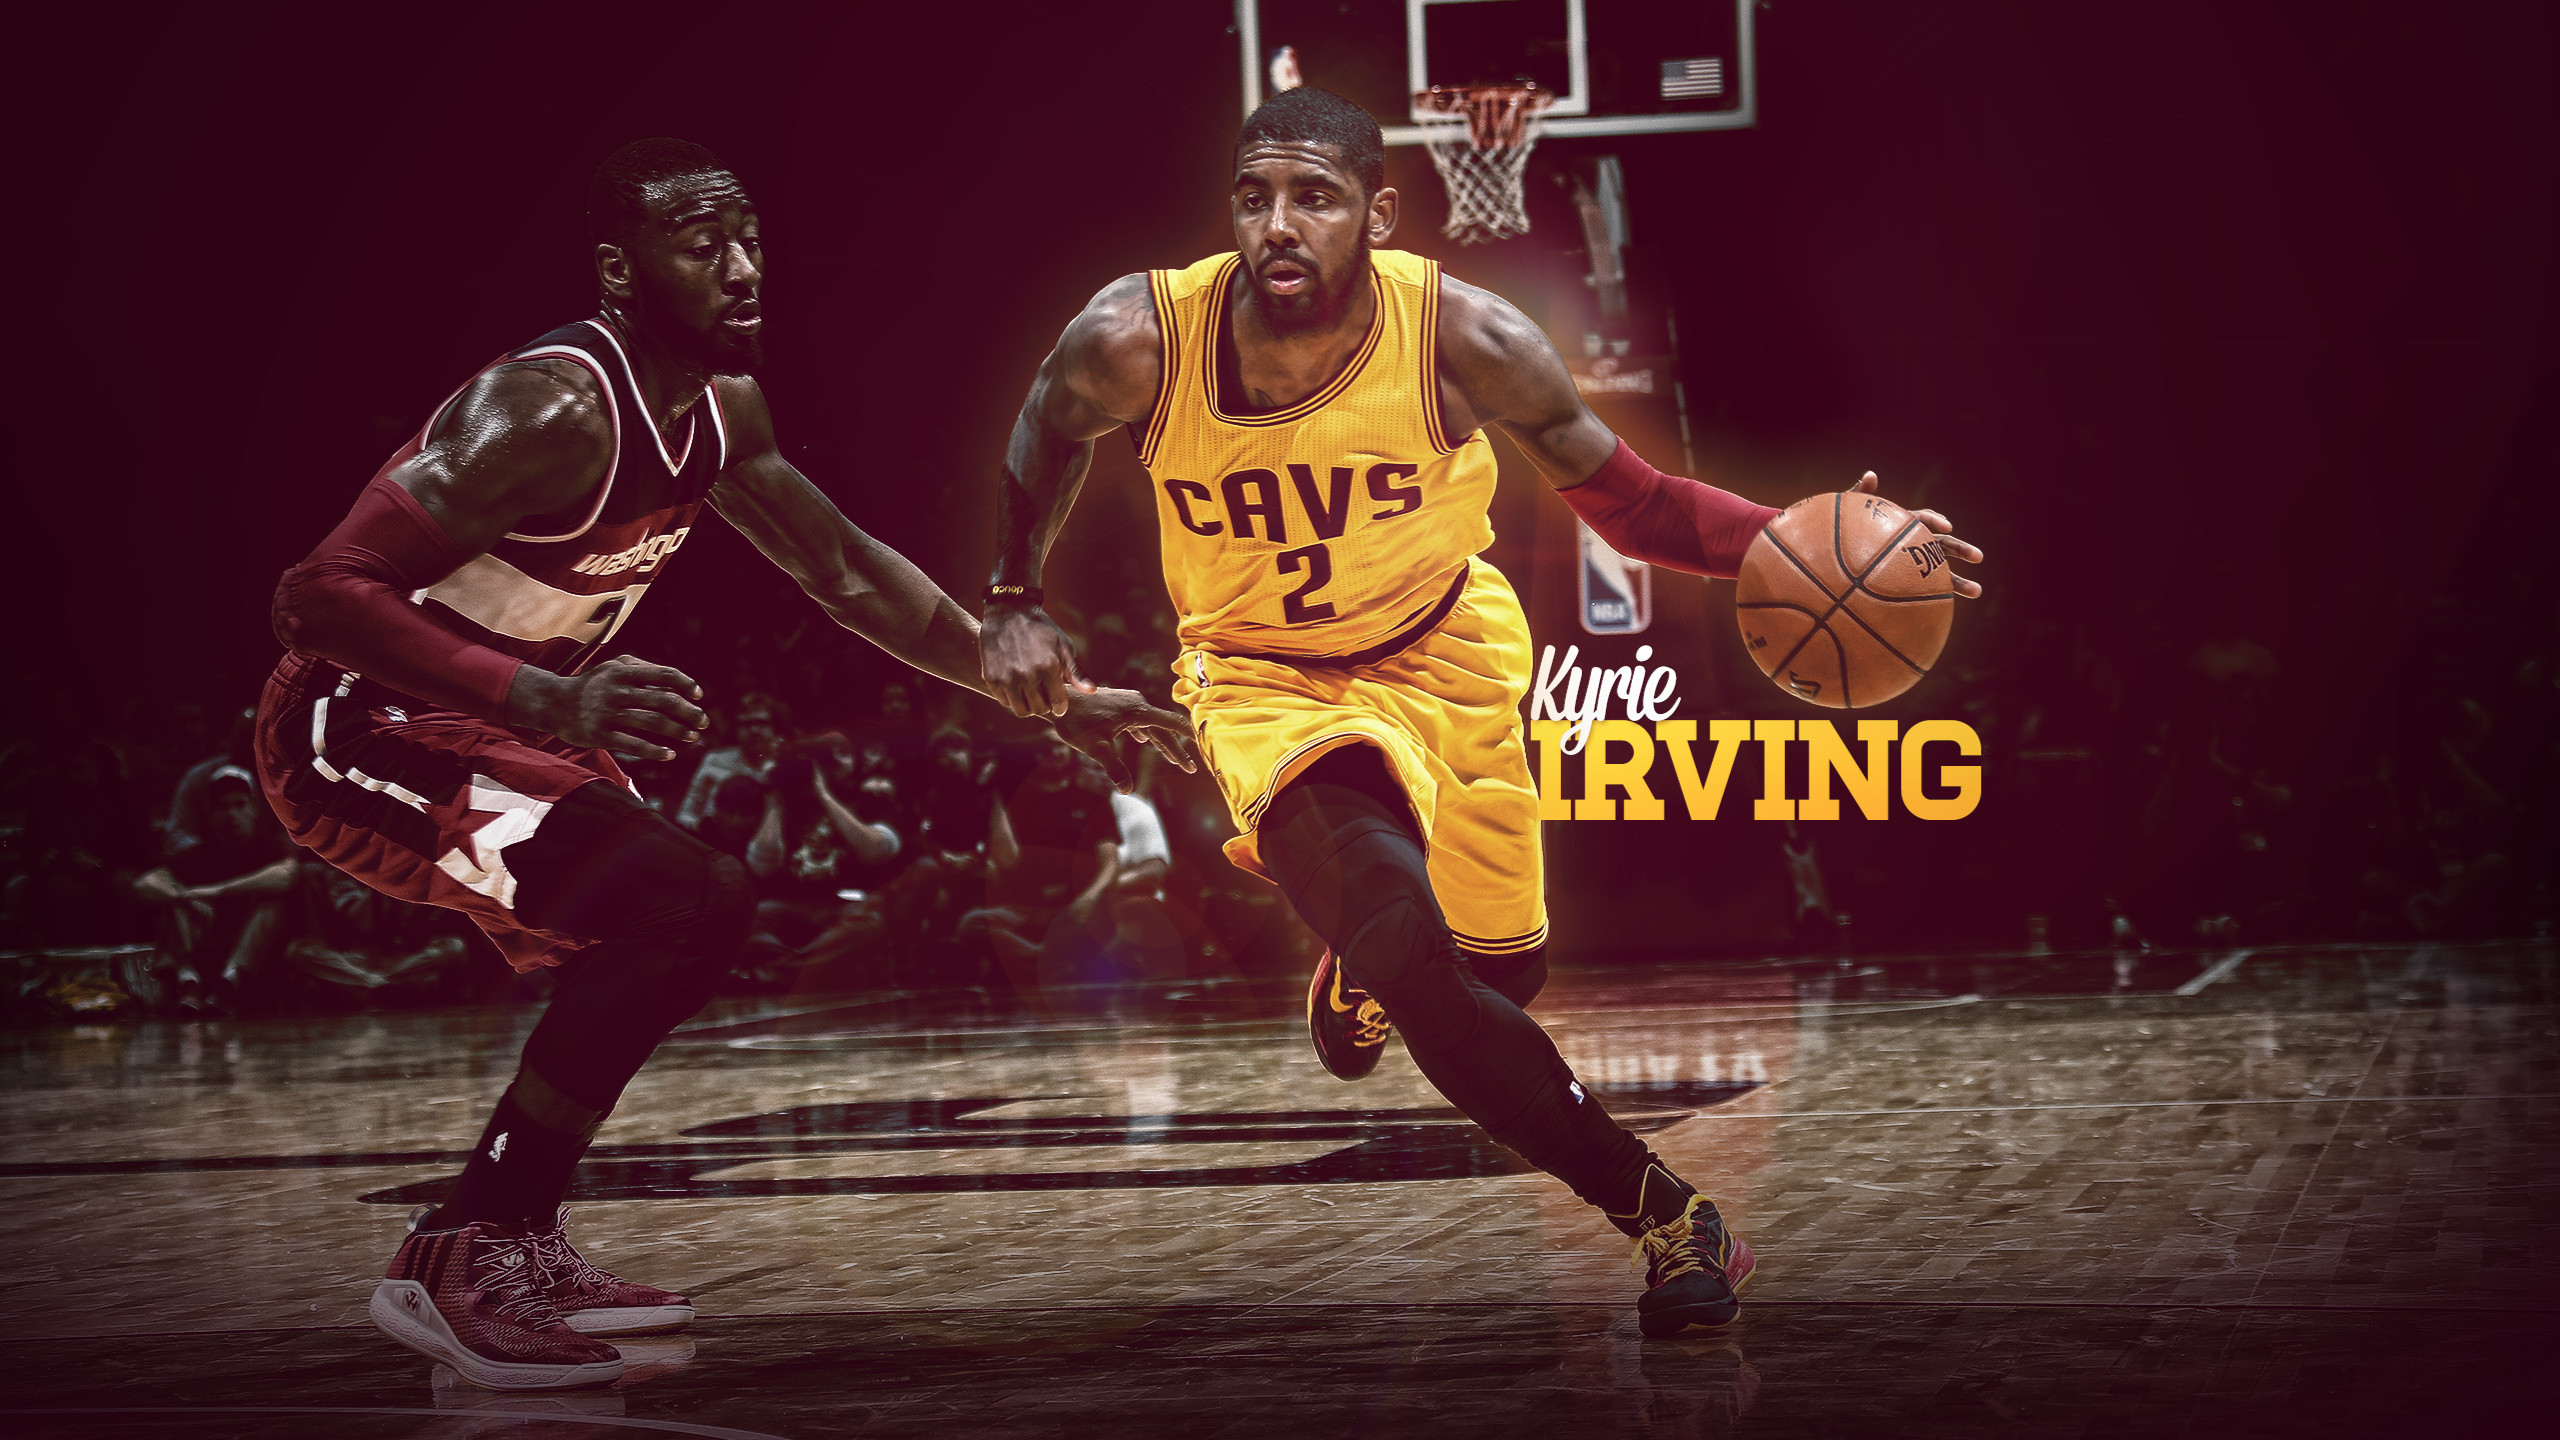 Kyrie Irving phone wallpaper 1080P 2k 4k Full HD Wallpapers Backgrounds  Free Download  Wallpaper Crafter